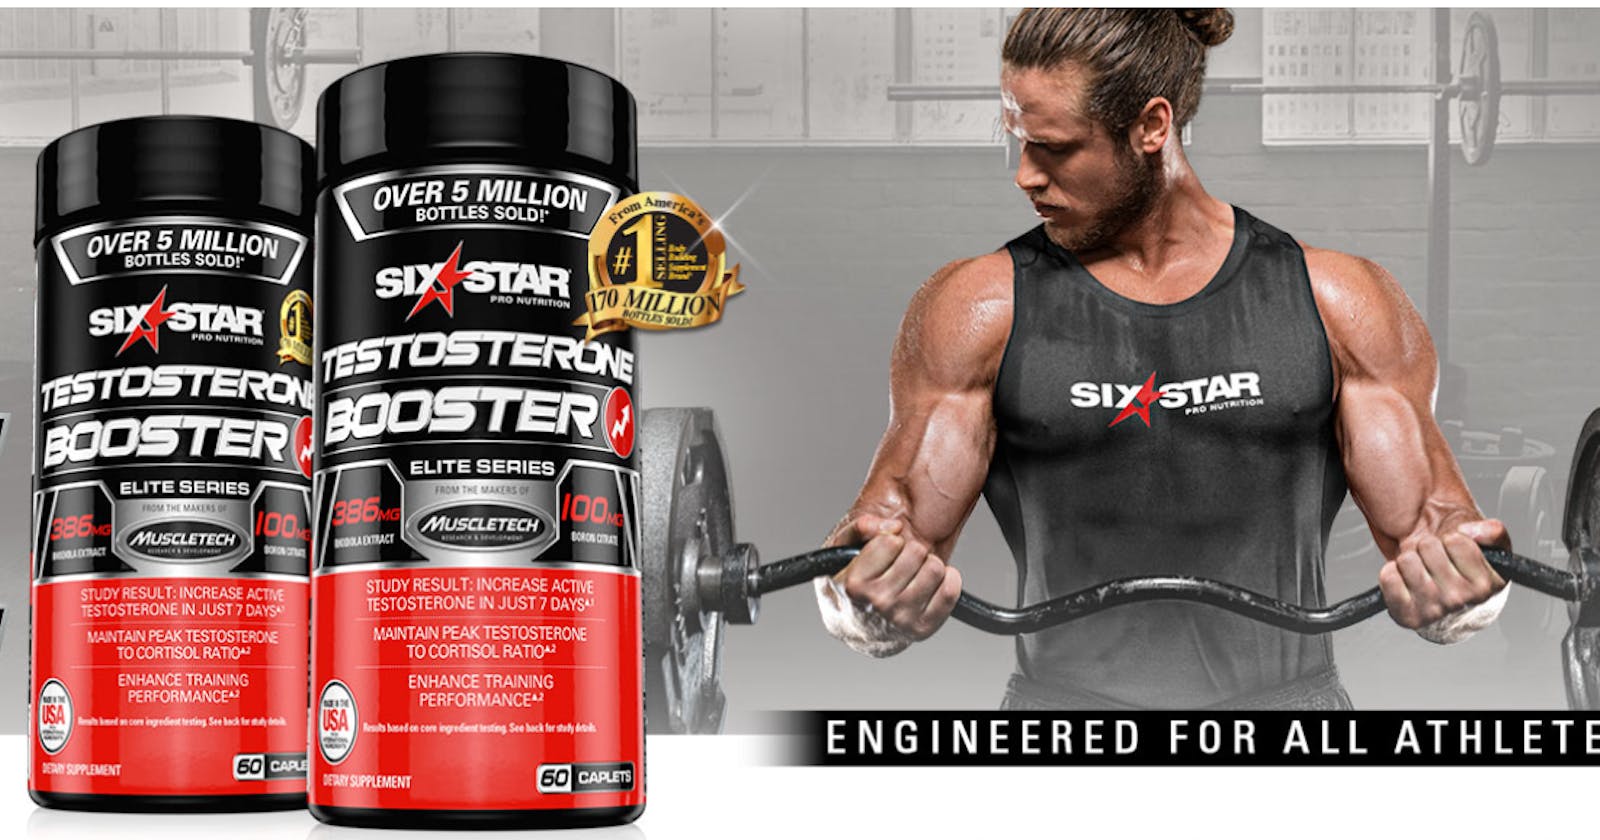 Six Star Testosterone Booster?